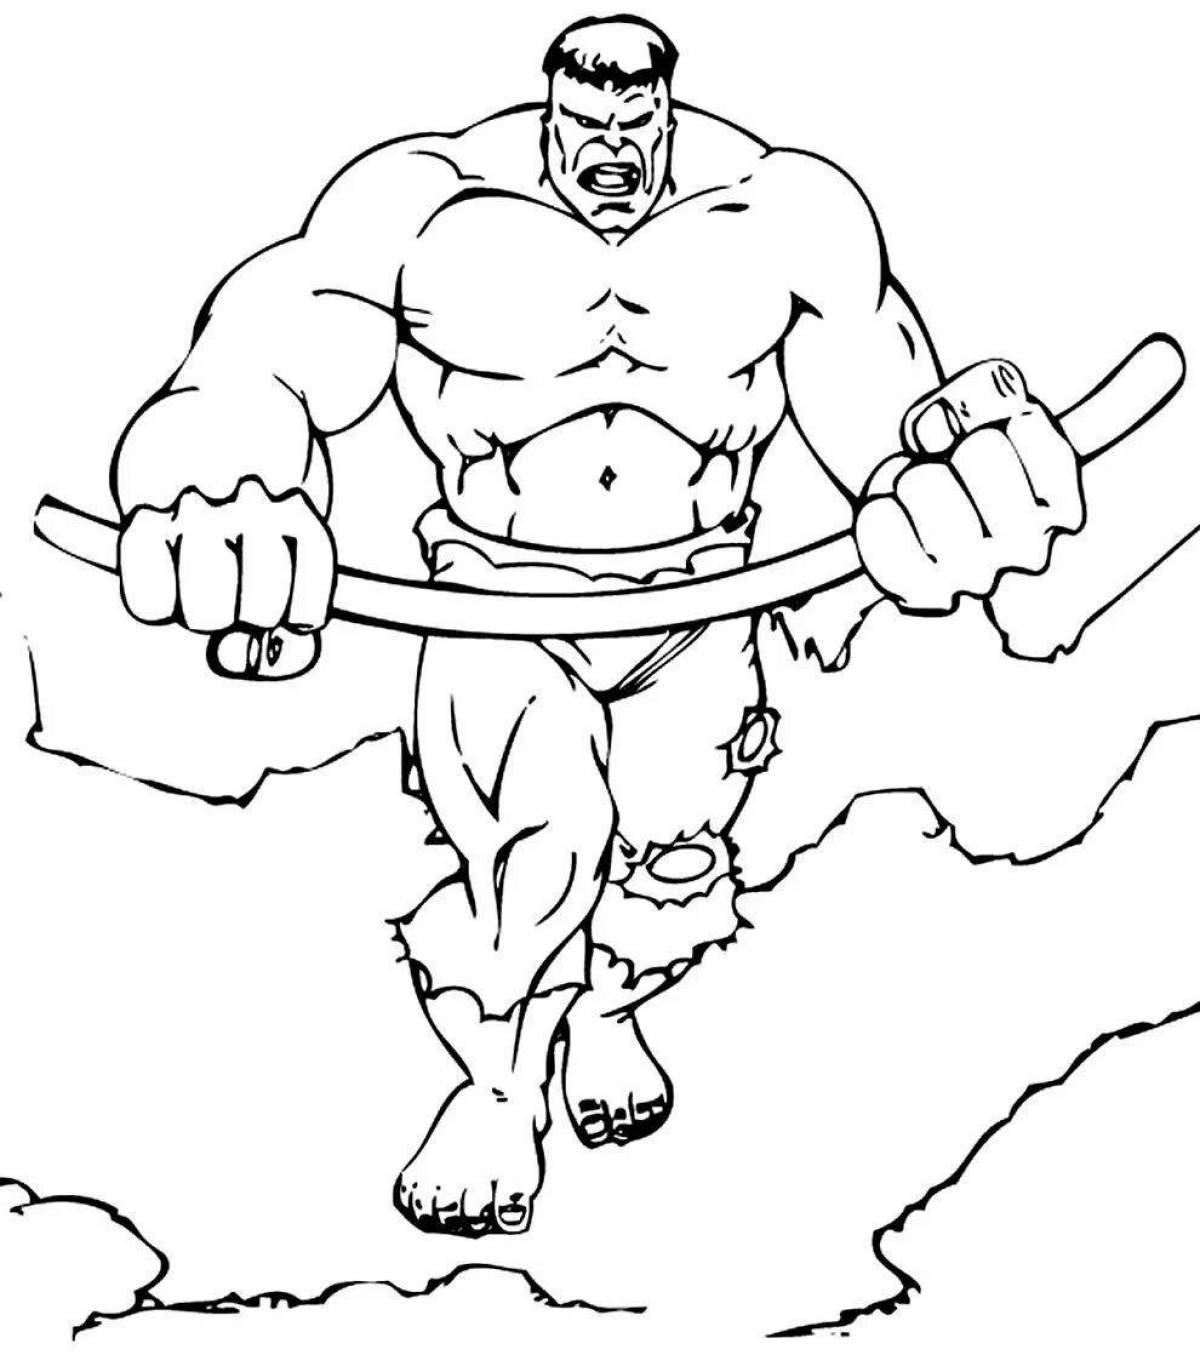 Coloring funny hulk for children 5-6 years old